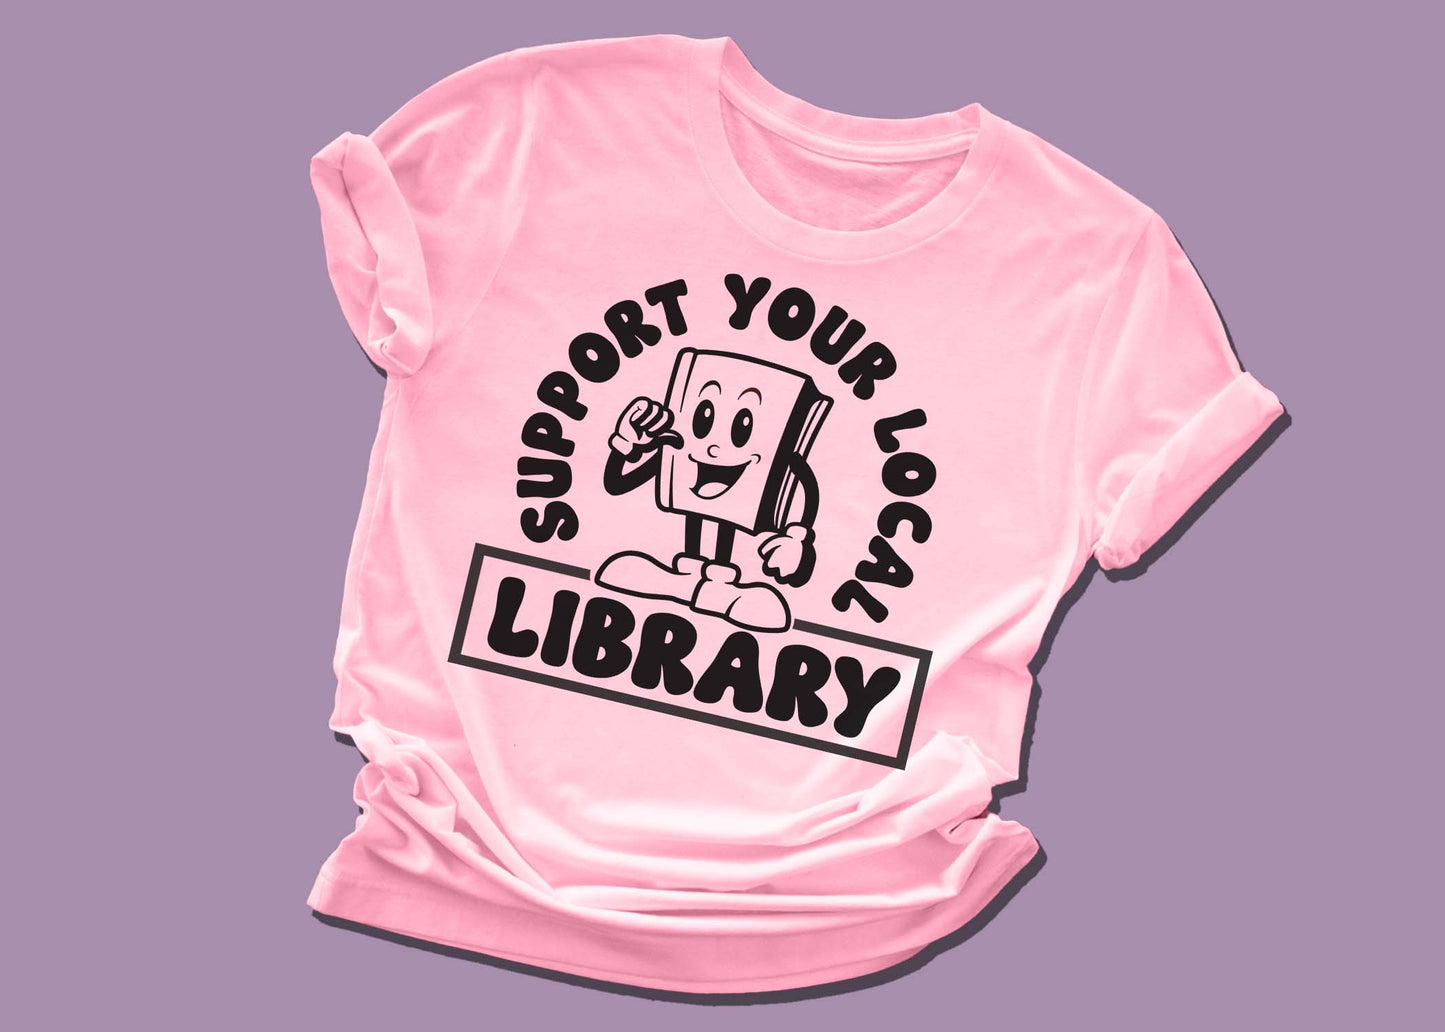 Support your local library tee